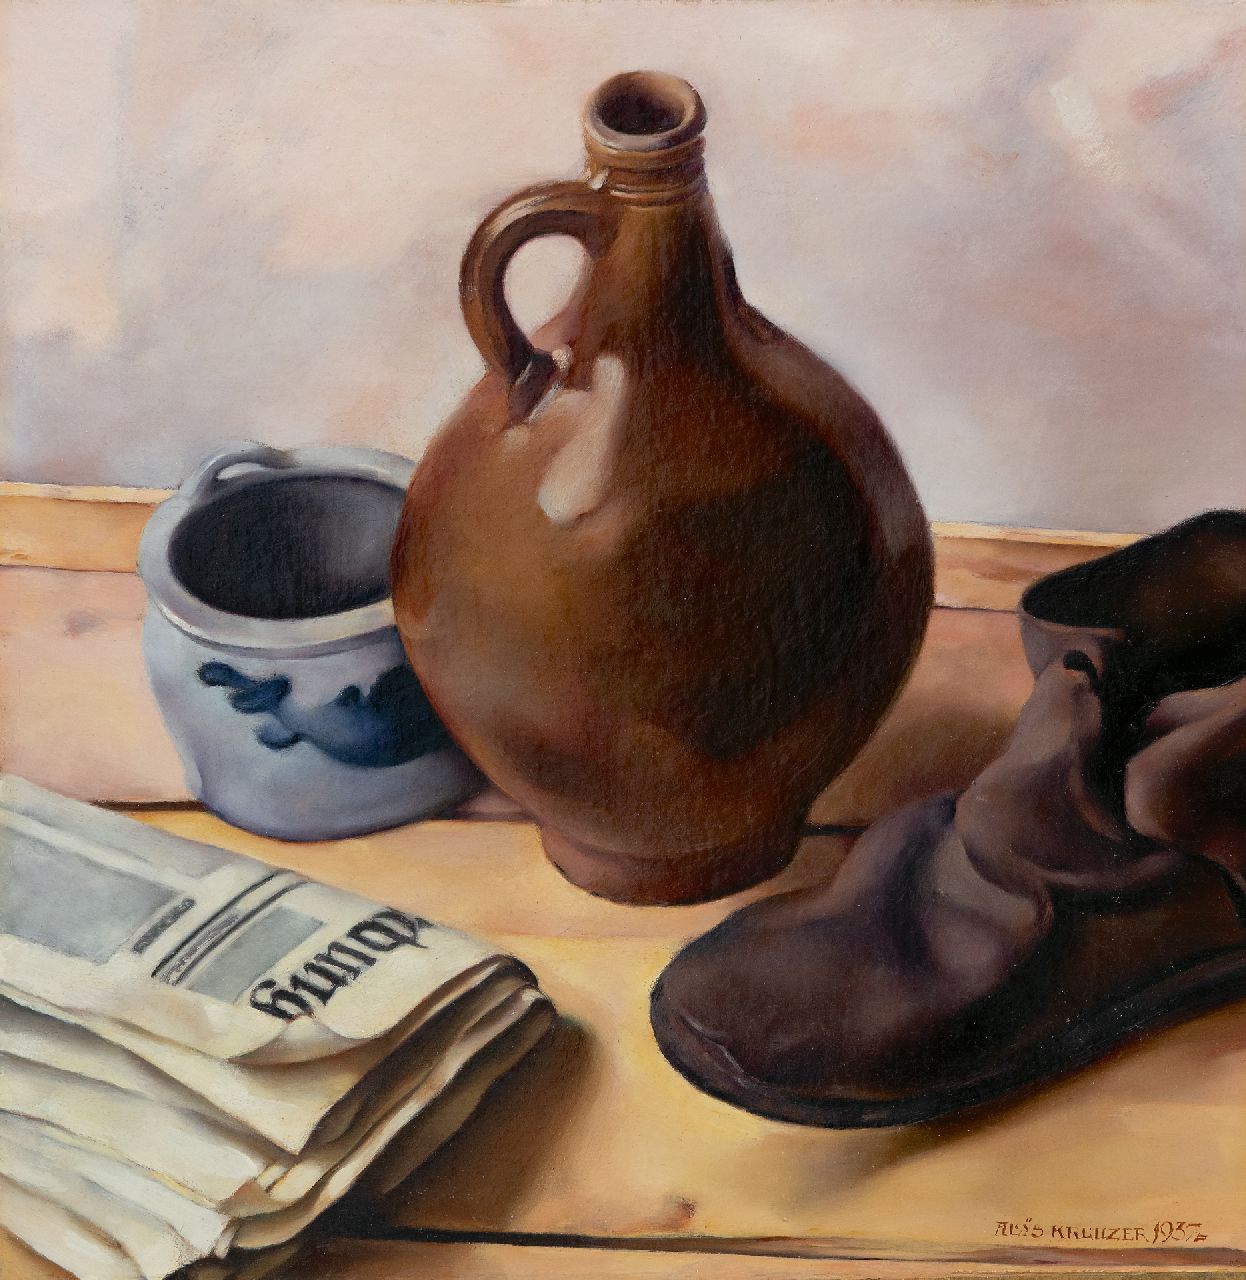 Kreuzer A.J.  | Aloys Johann Kreuzer | Paintings offered for sale | Stilllife with jug, newspaper and a shoe, oil on canvas laid down on board 49.6 x 45.8 cm, signed l.r. and dated 1937